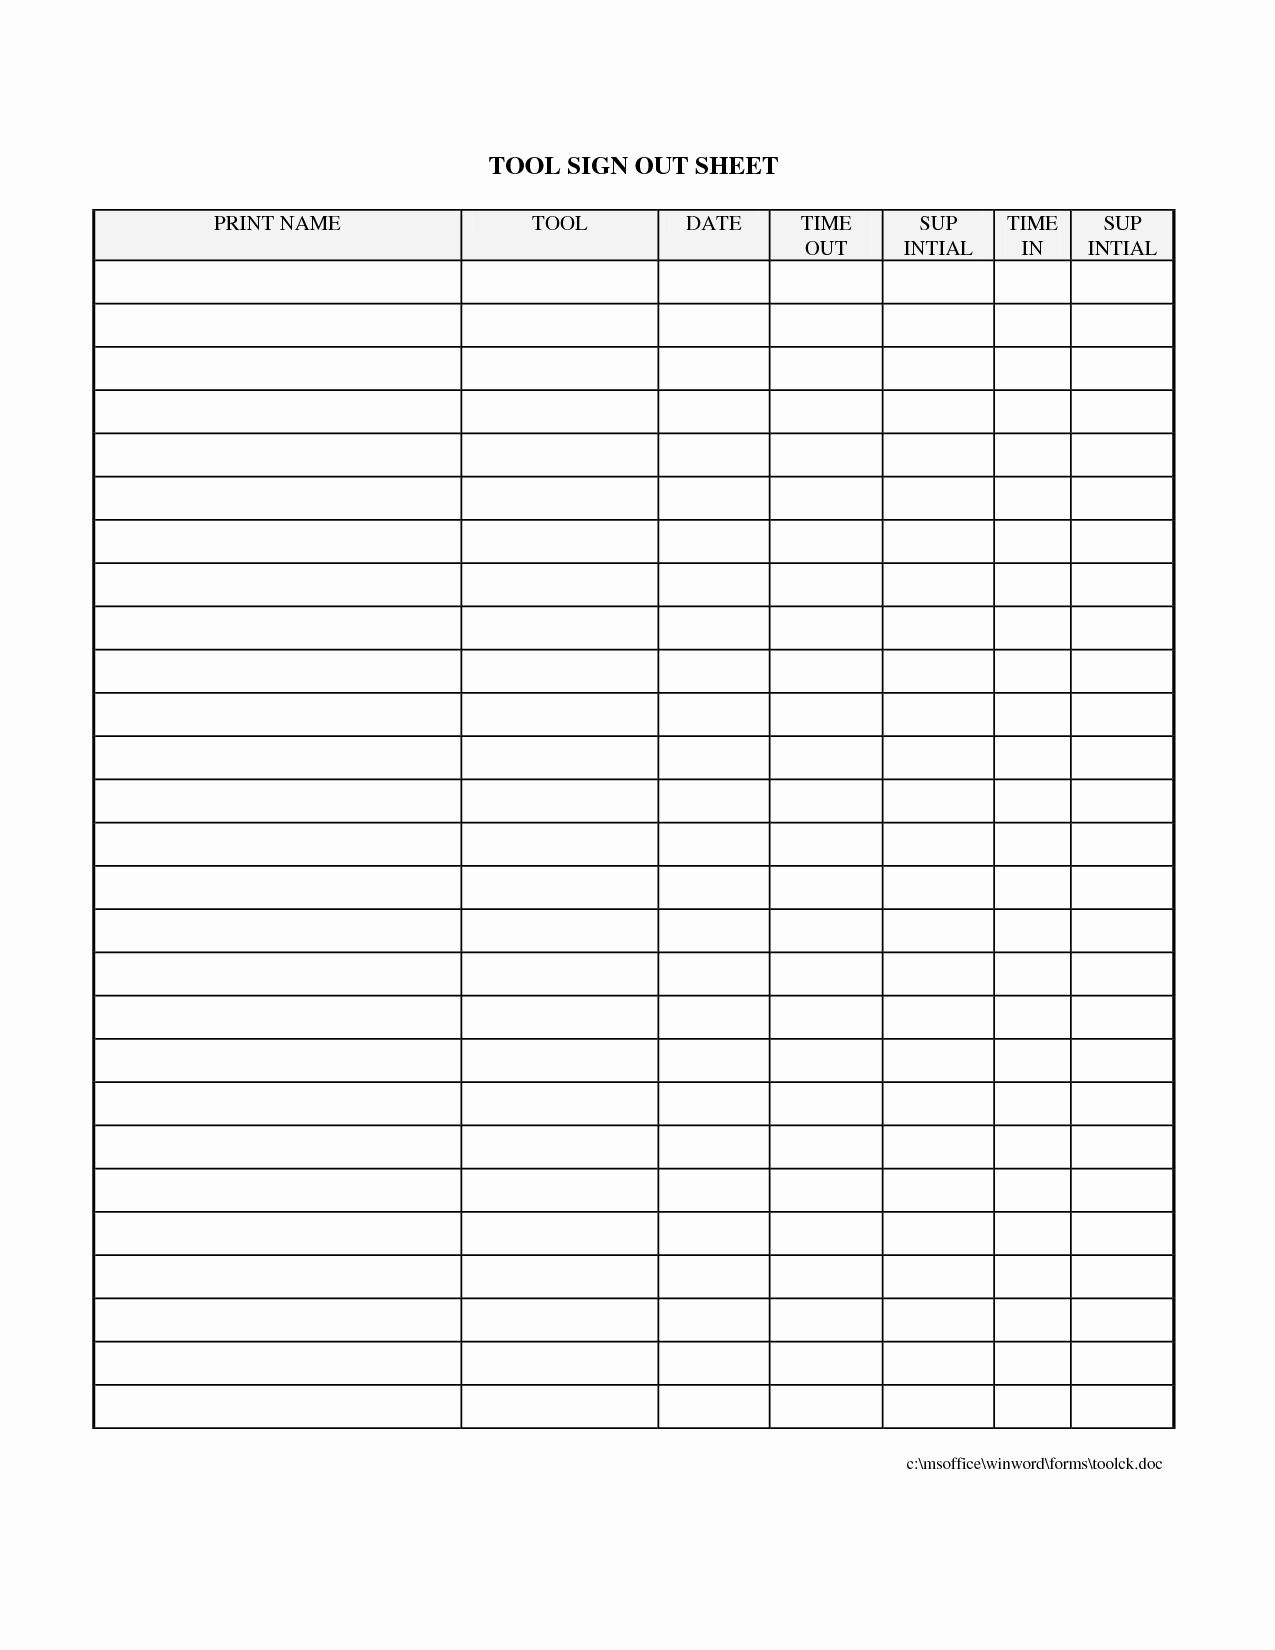 Signing In and Out Template Lovely Printable Sign Out Sheet Template